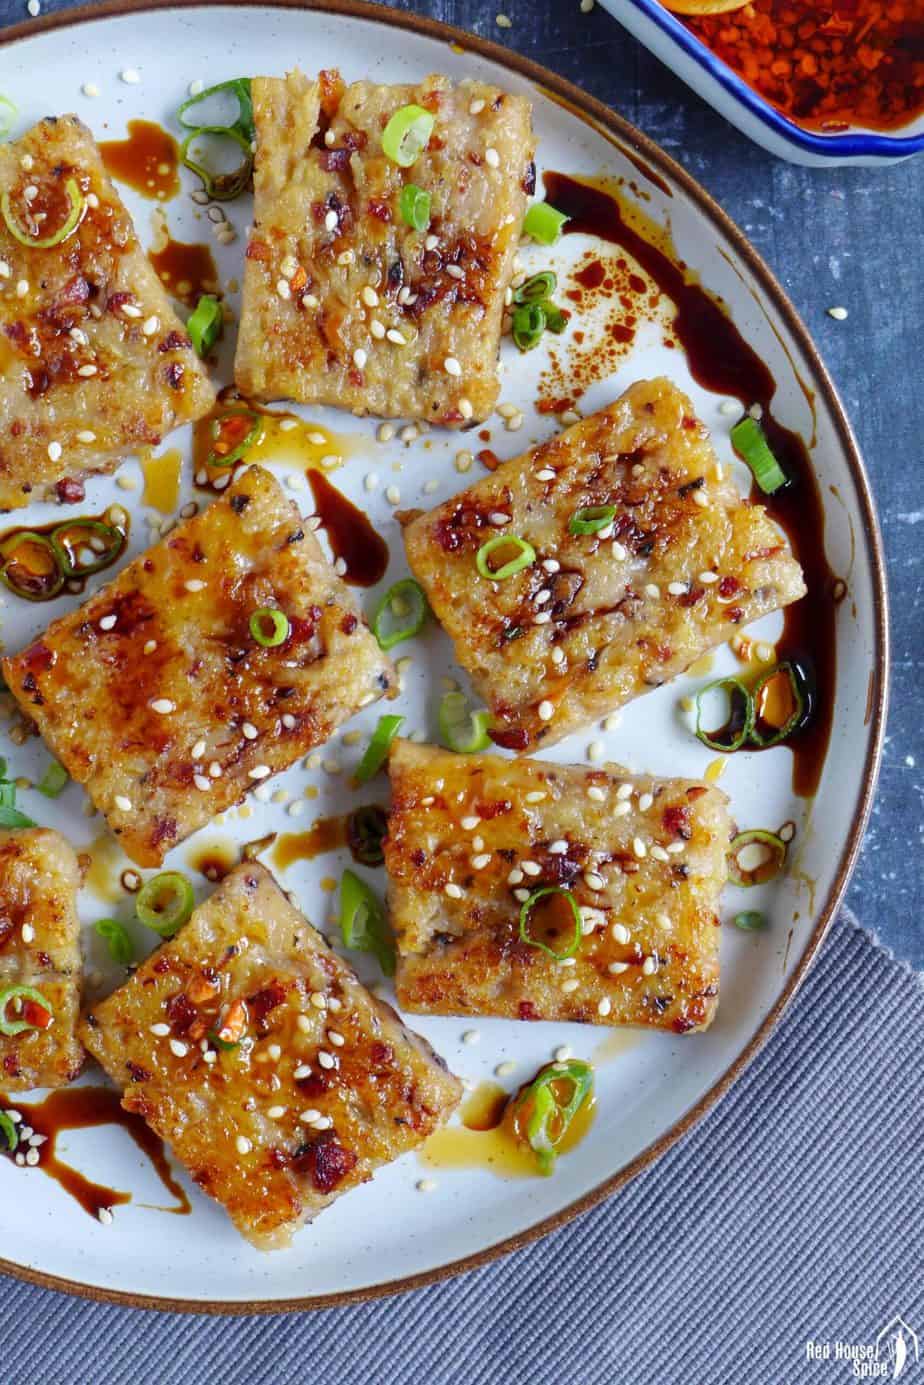 Chinese turnip cake slices with soy sauce and chili oil